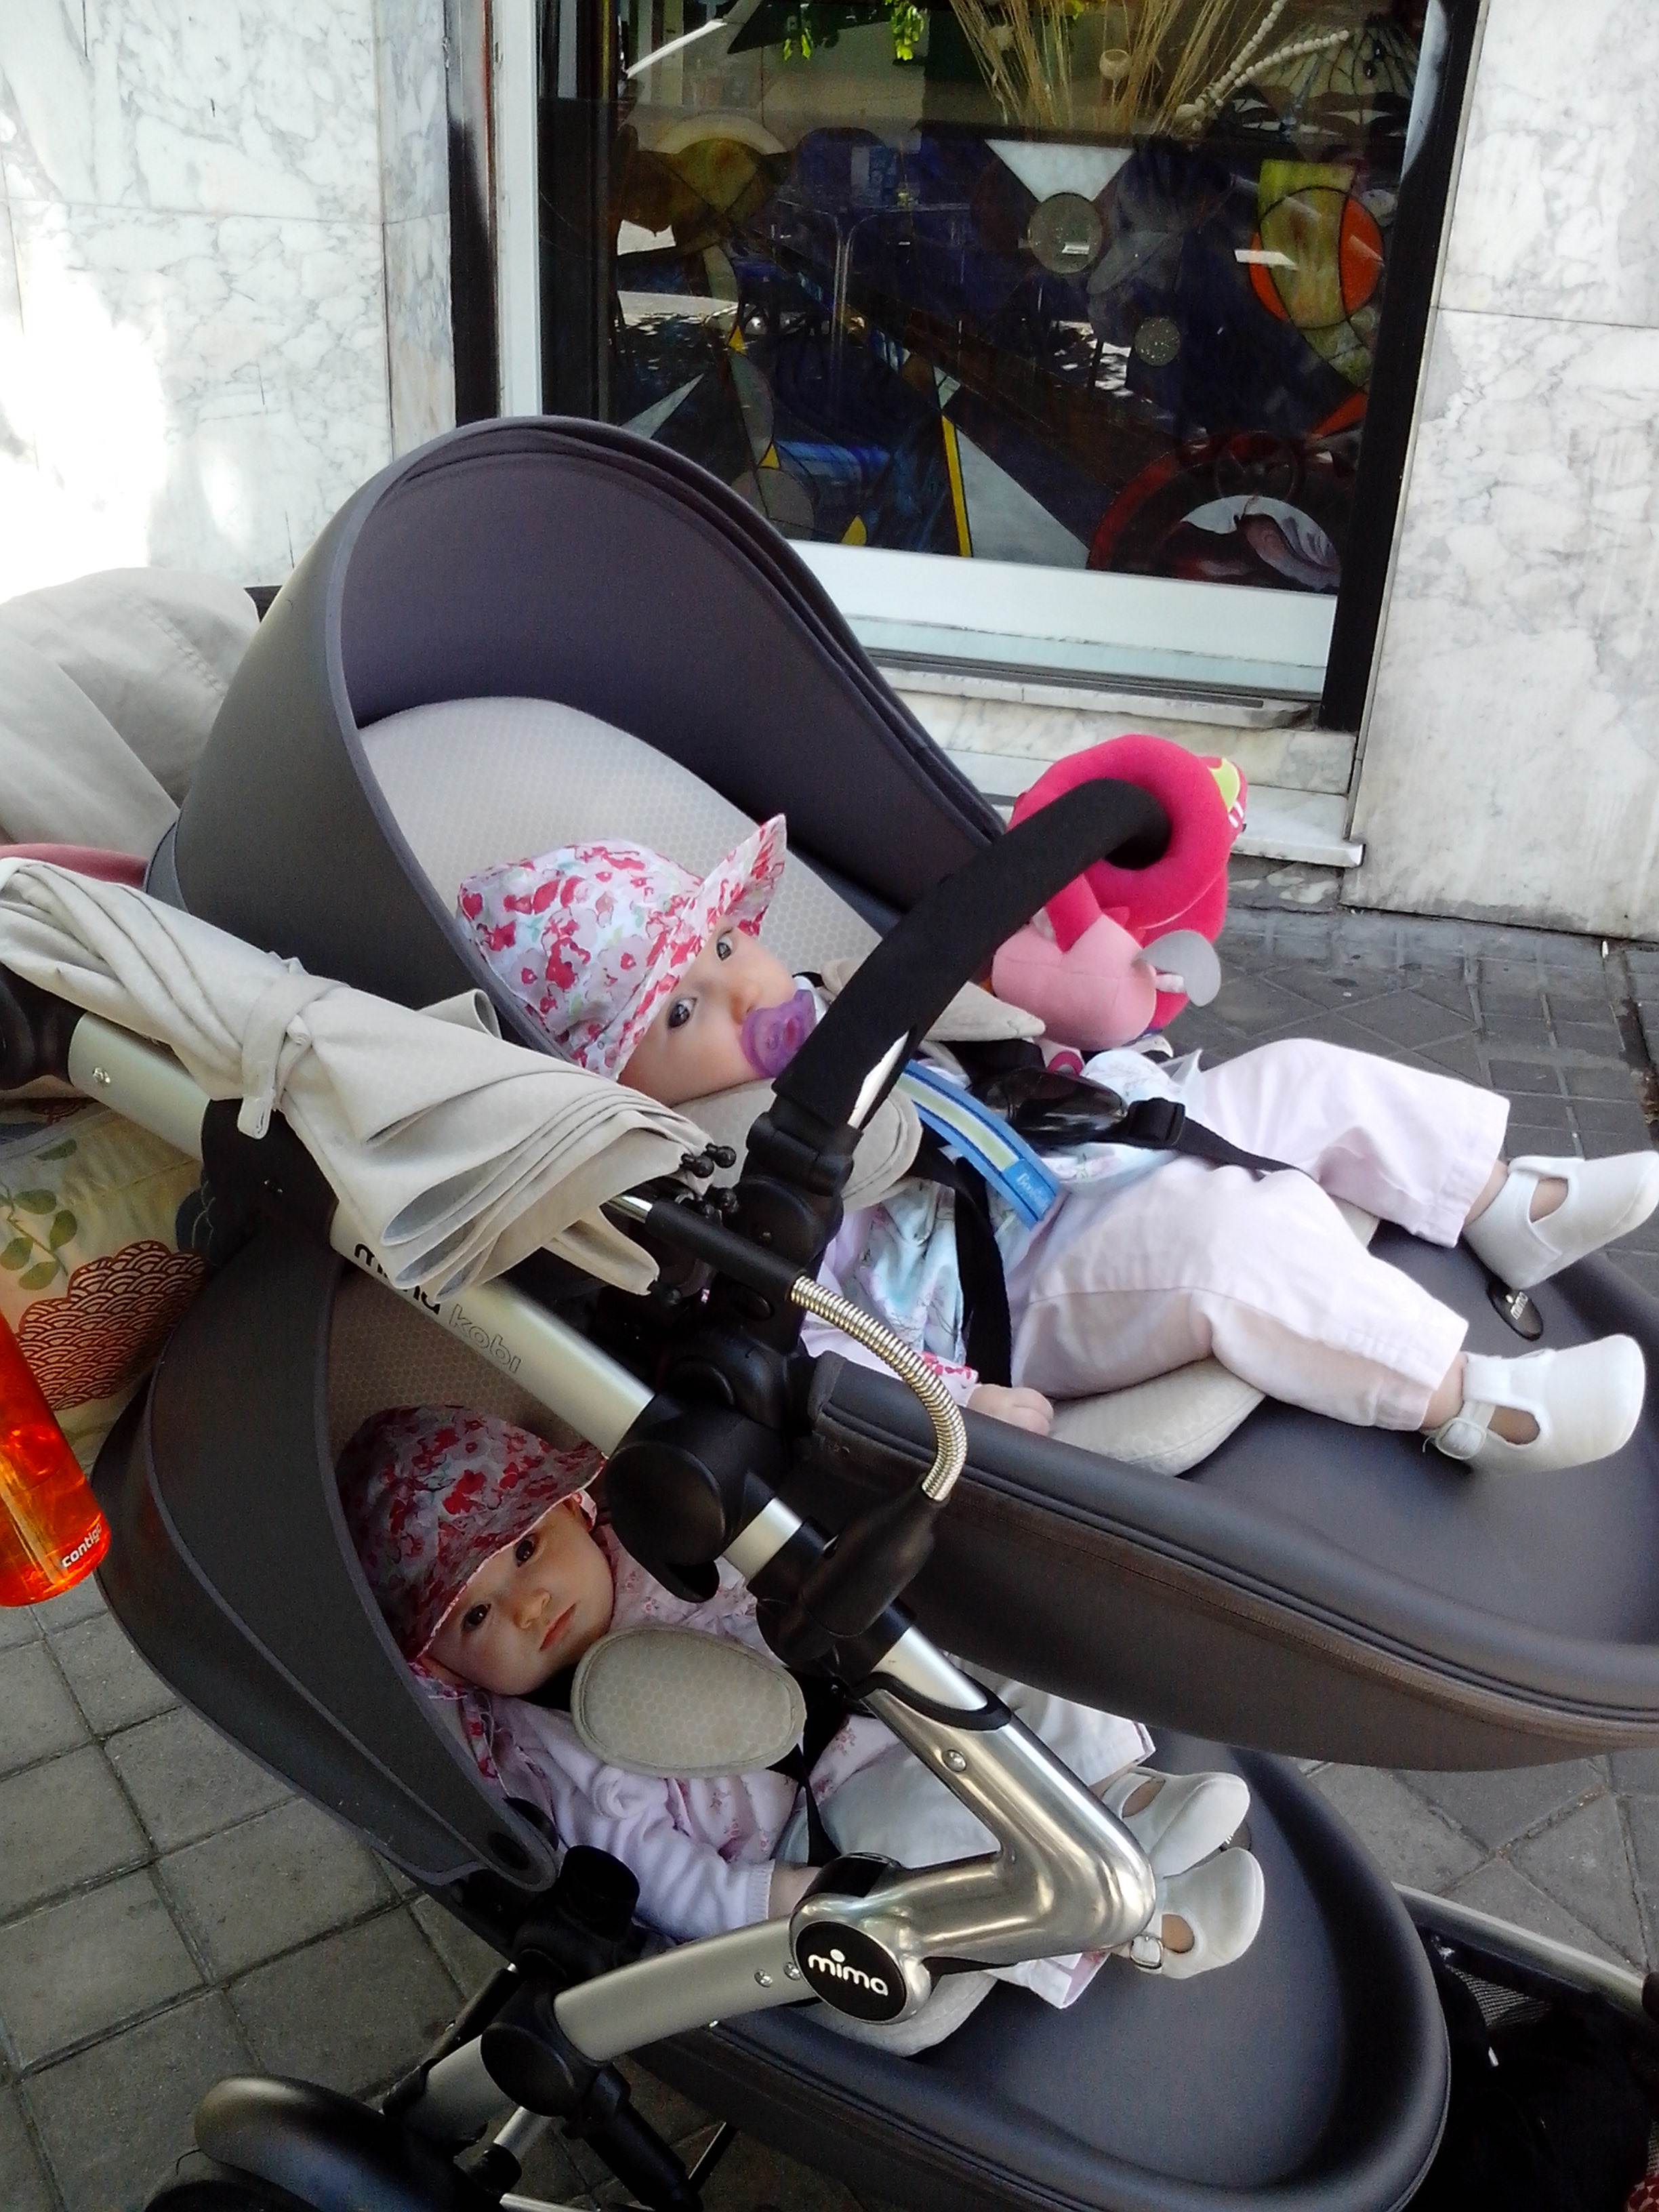 mima stroller for twins